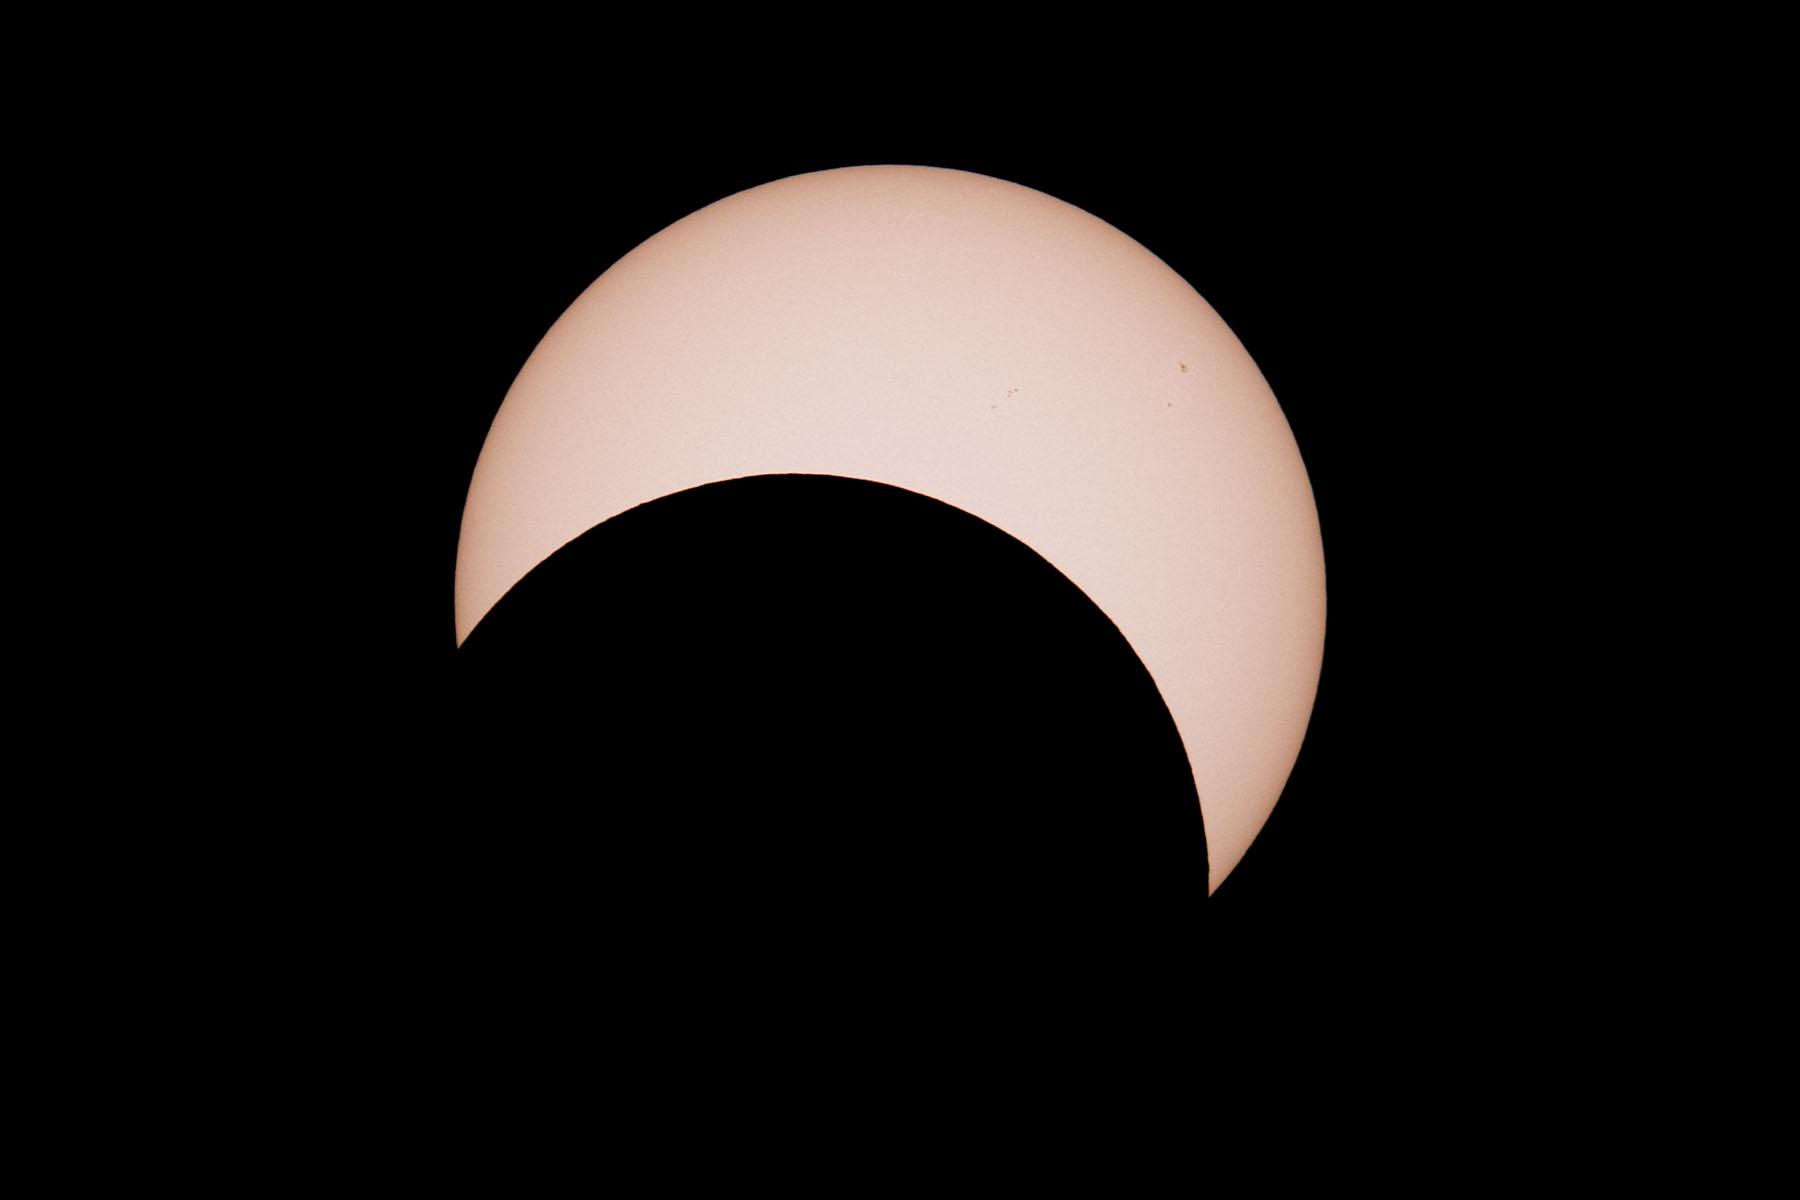 Annular solar eclipse, 32 minutes after peak.  Glass solar filter on Televue 85 telescope, Canon 6D Mark II camera on T-mount, 600mm F7 equivalent.  Click for next photo.